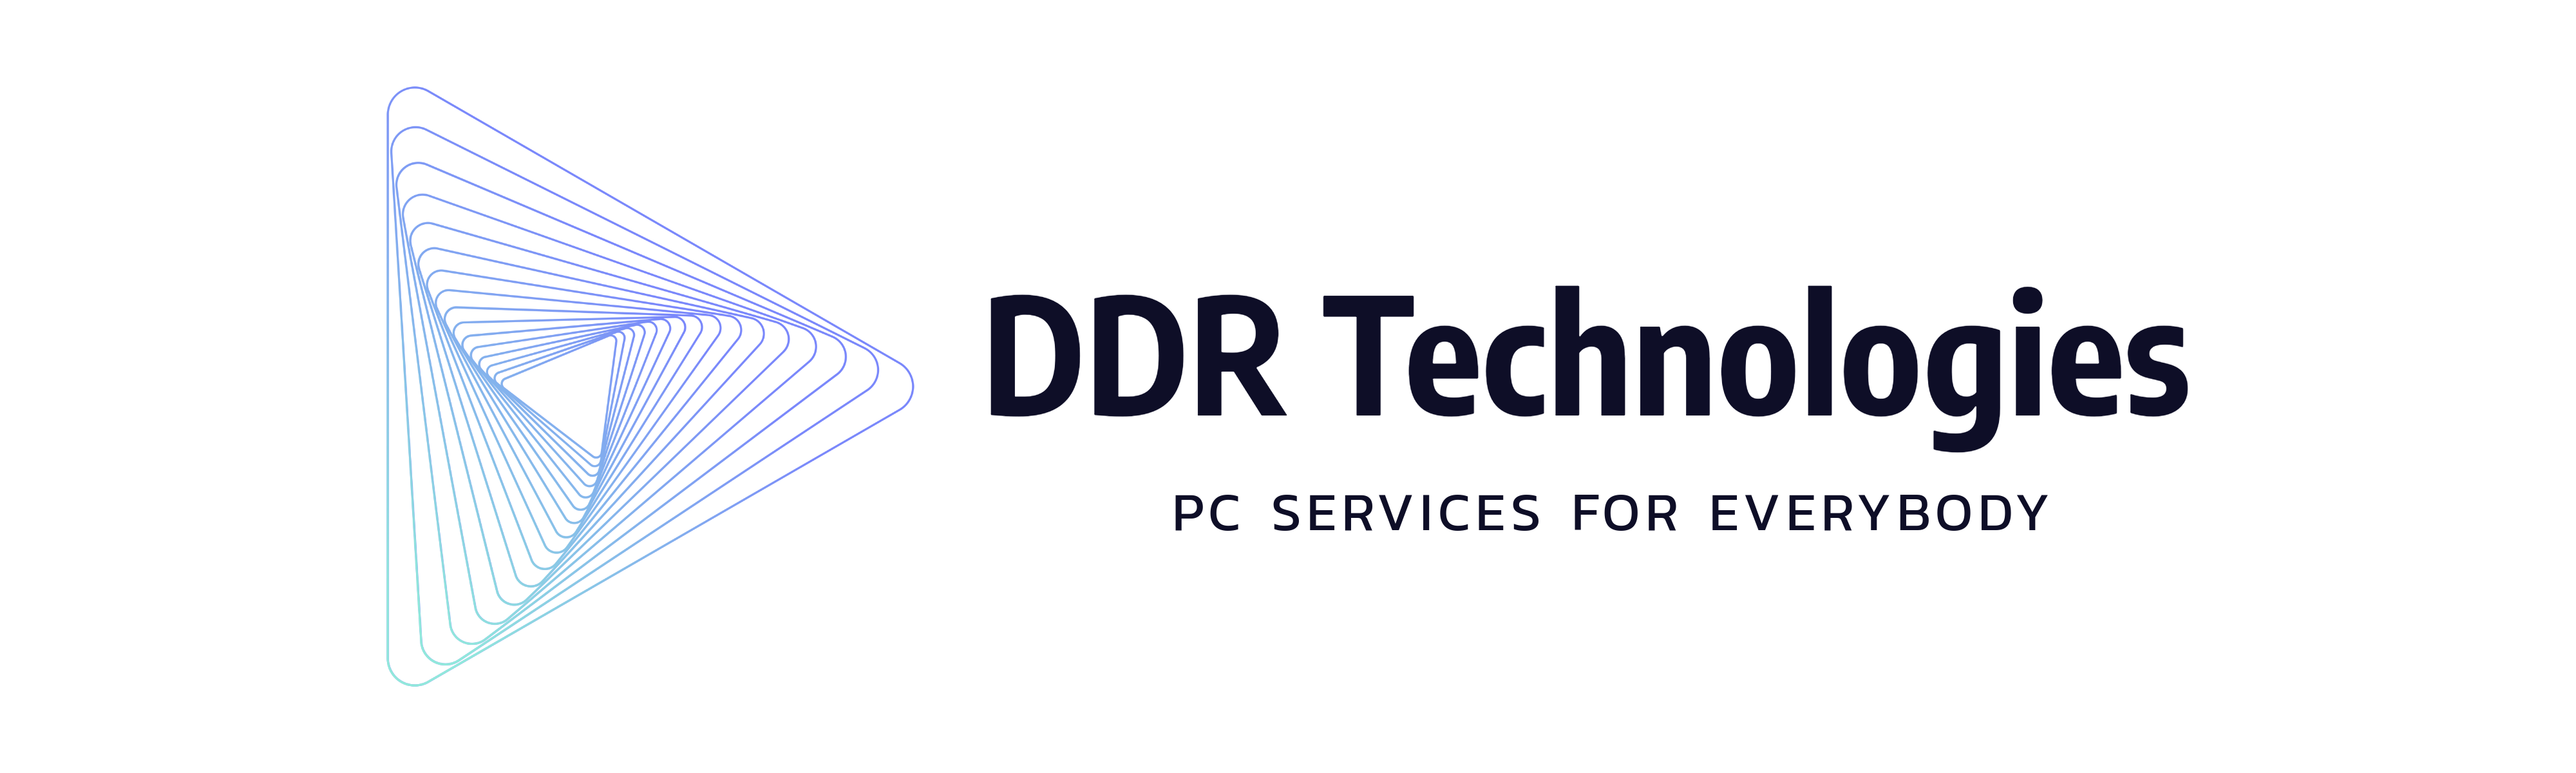 Welcome to DDR  Technologies